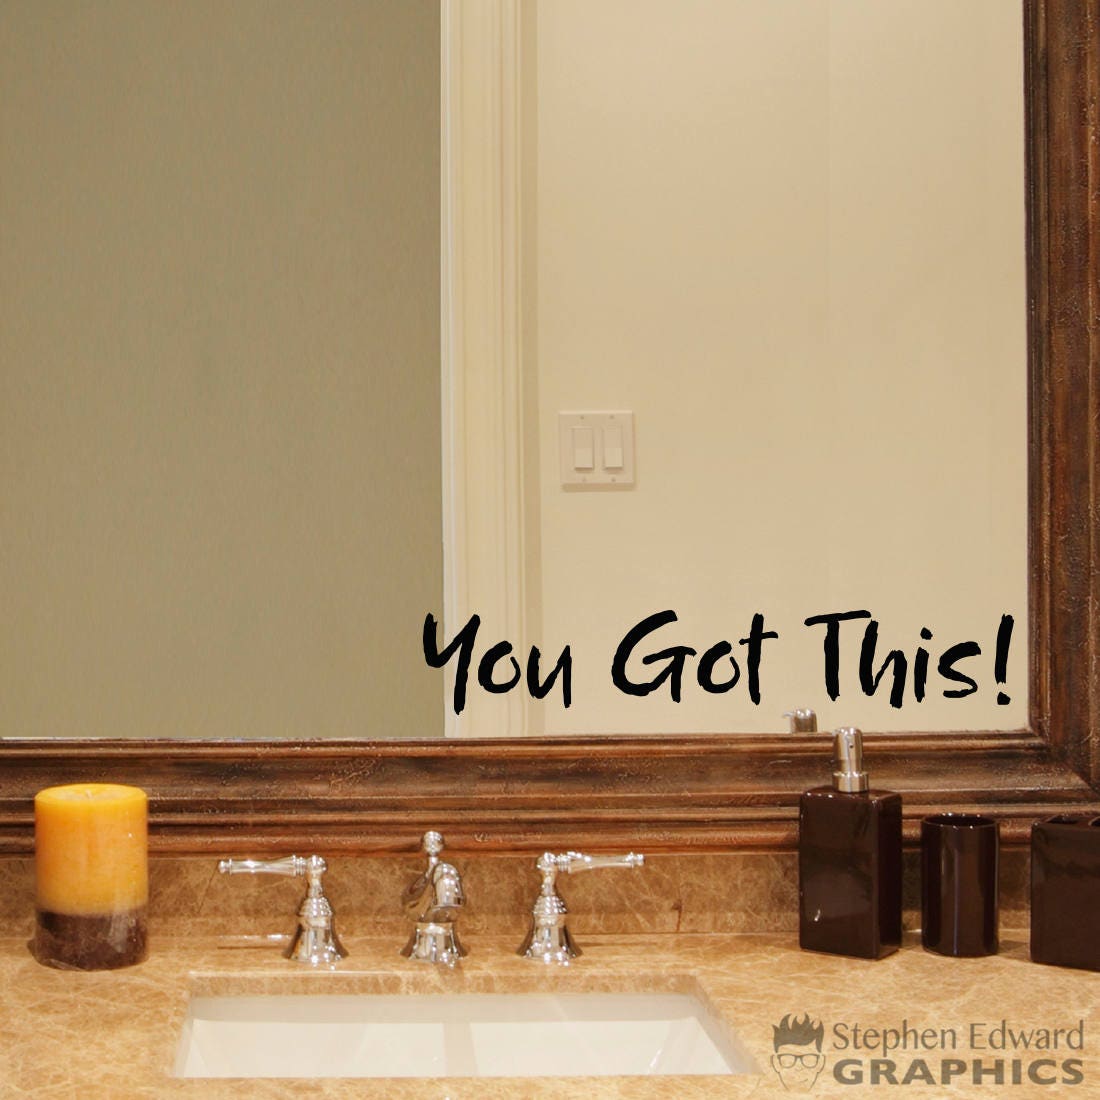 You Got This! Decal - Bathroom decal - Mirror decal - distressed brush lettering font